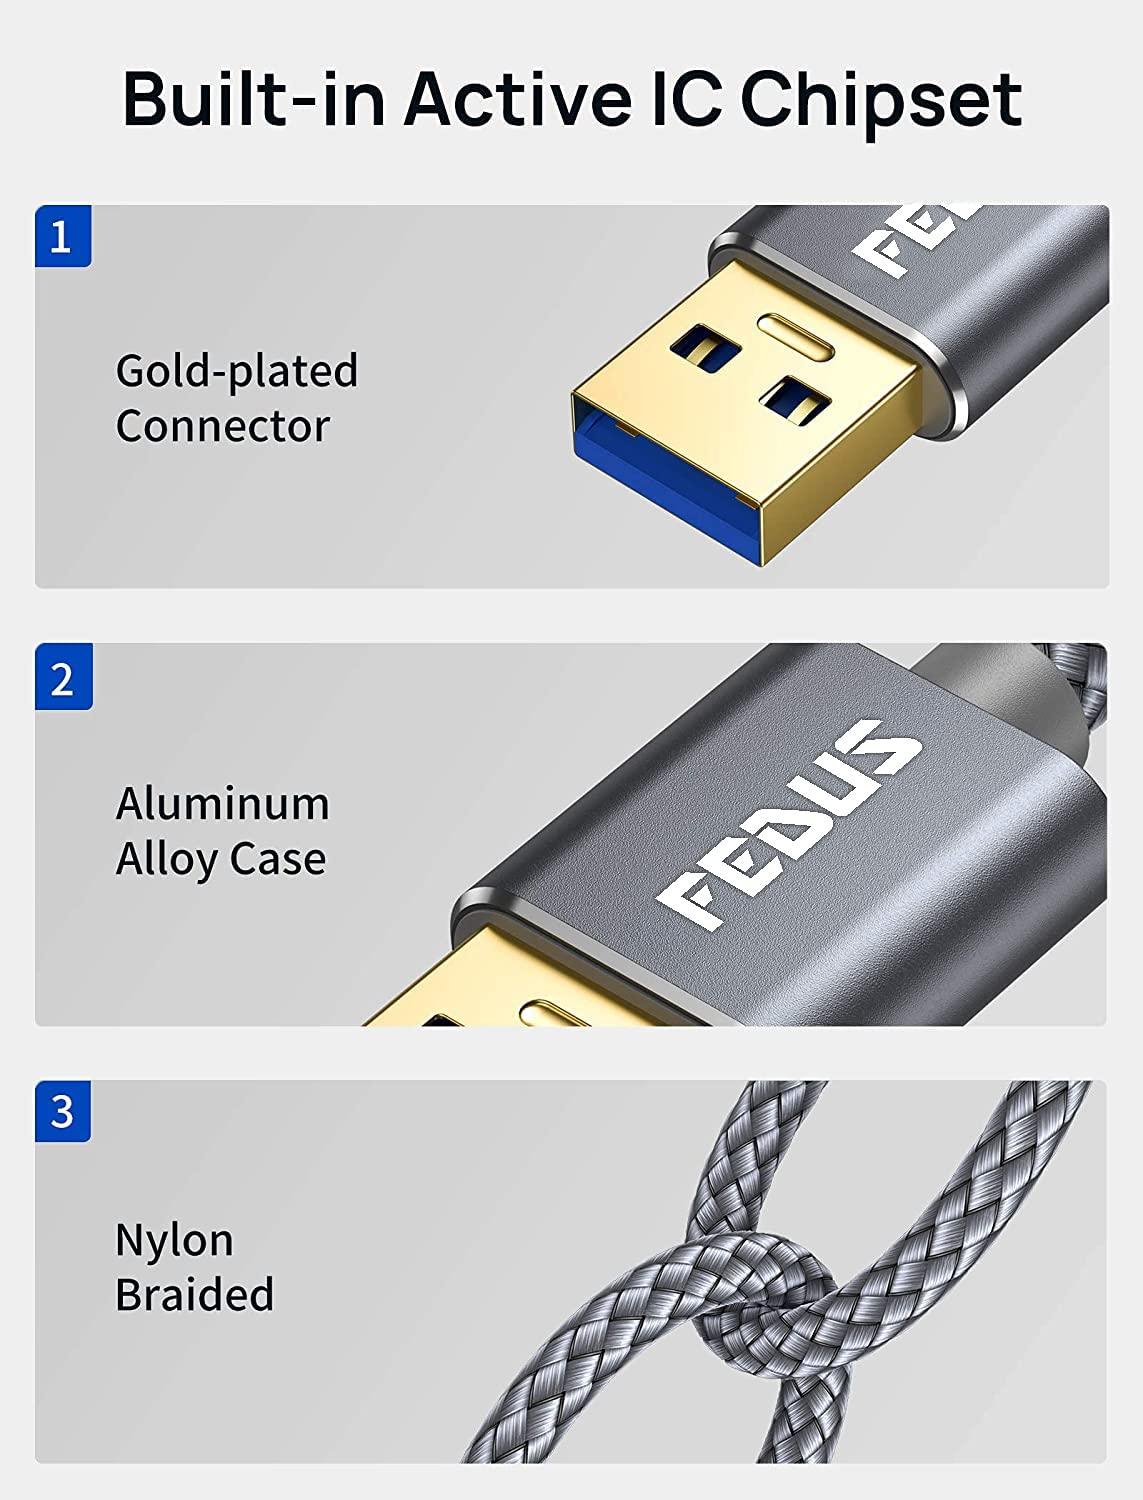 FEDUS USB 3.0 Extension Cable, Aluminum Alloy USB Cable Extender SuperSpeed USB 3.0 Type A Male to USB A Female Extension Cord for Printer, TV, Playstation, Xbox, Hard Drive, Keyboard, USB hub - FEDUS